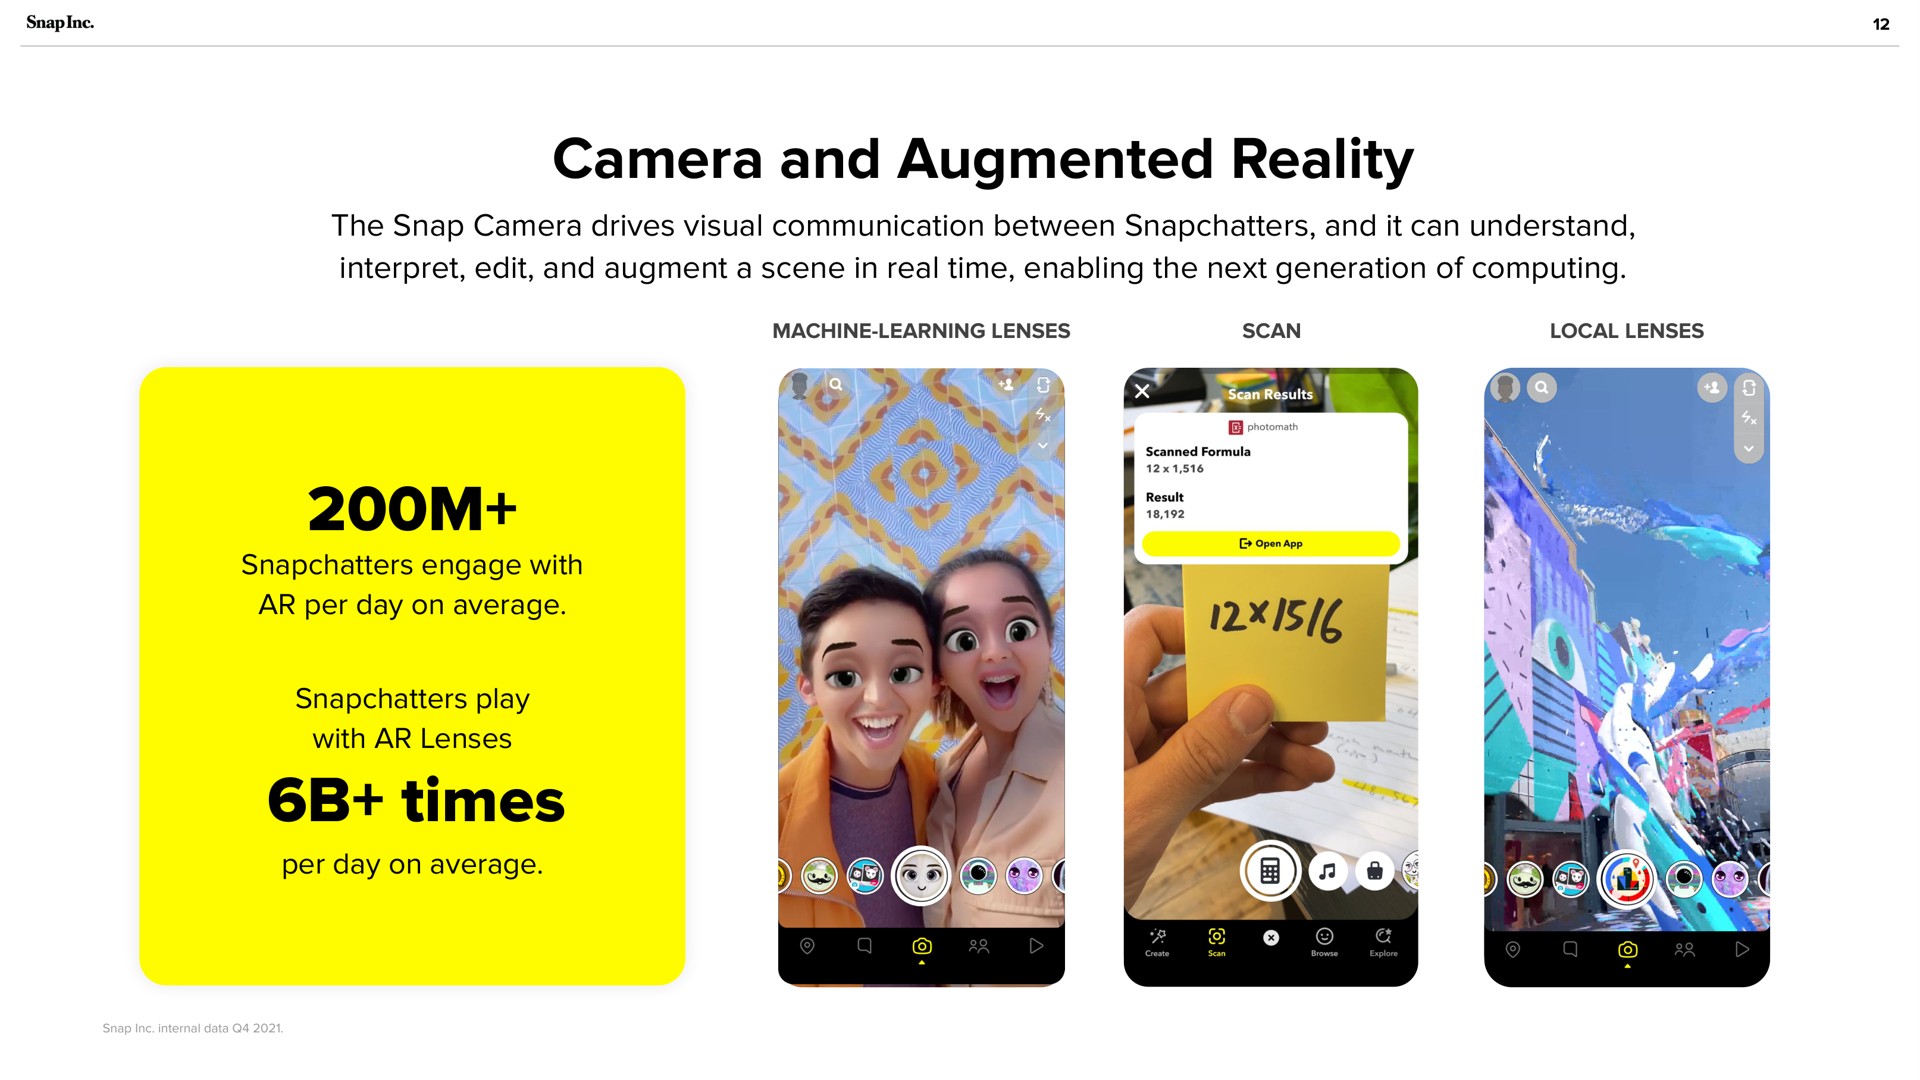 camera and augmented reality times per day on average | Snap Inc